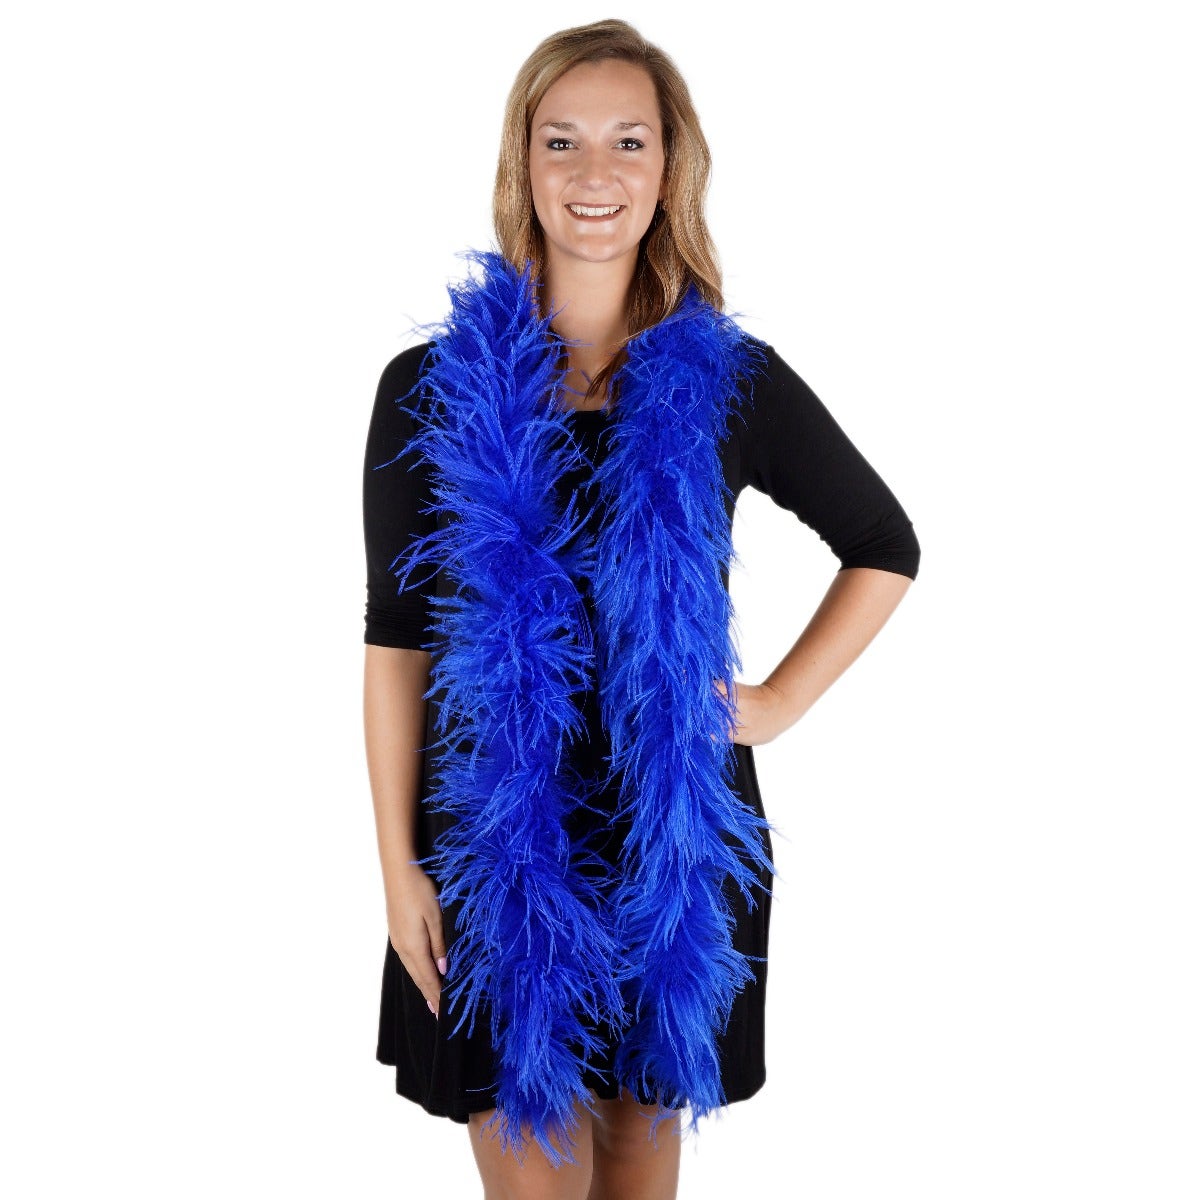 Ostrich Feather Boa - Value Two-Ply - Royal Blue